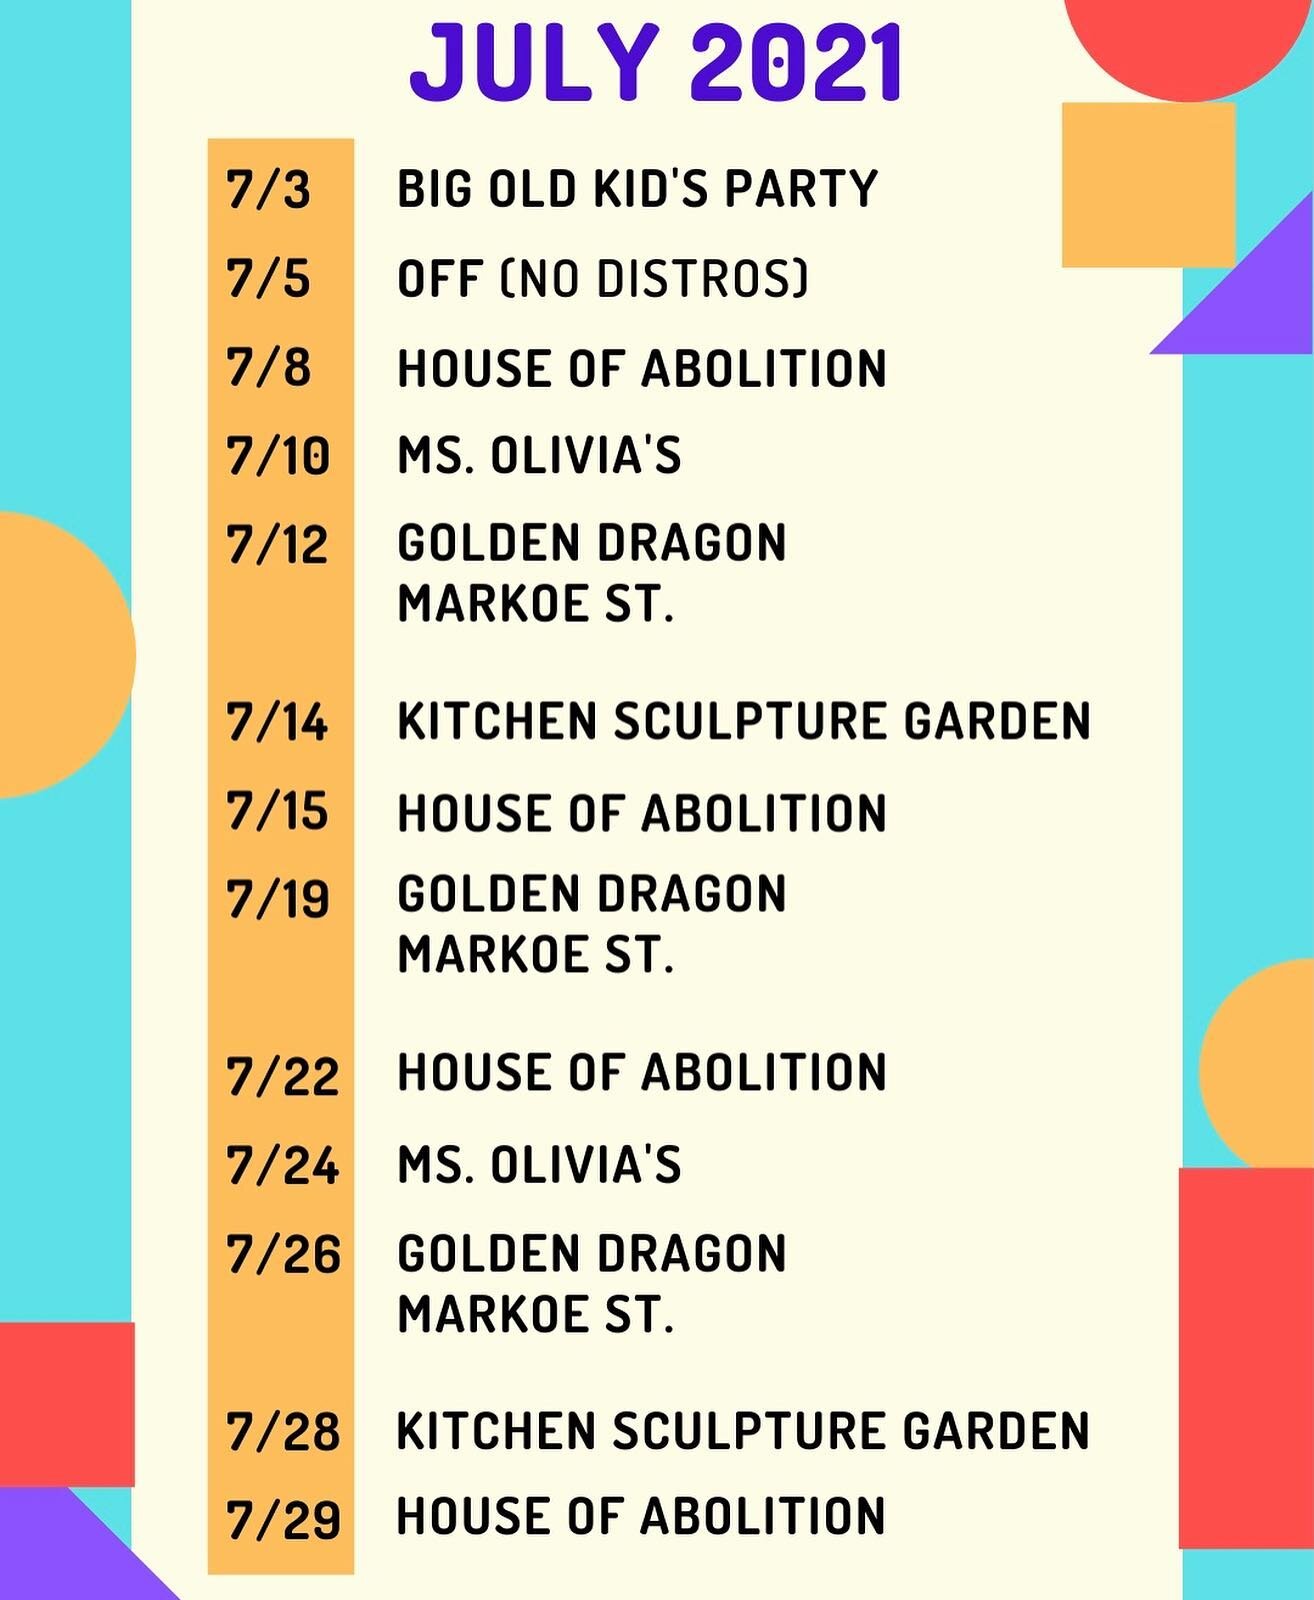 Check out our July calendar!
🔸House of Abolition: 51st &amp; Regent 4-7pm
🔸Ms. Olivia&rsquo;s: 61st &amp; Woodland 12-2pm
🔸Golden Dragon: 53rd &amp; Rodman 1-3pm
🔸Markoe St: 1356 S. Markoe St. 6-7pm
🔸Kitchen Sculpture: 2241 N. Phillip St. 5-6pm
